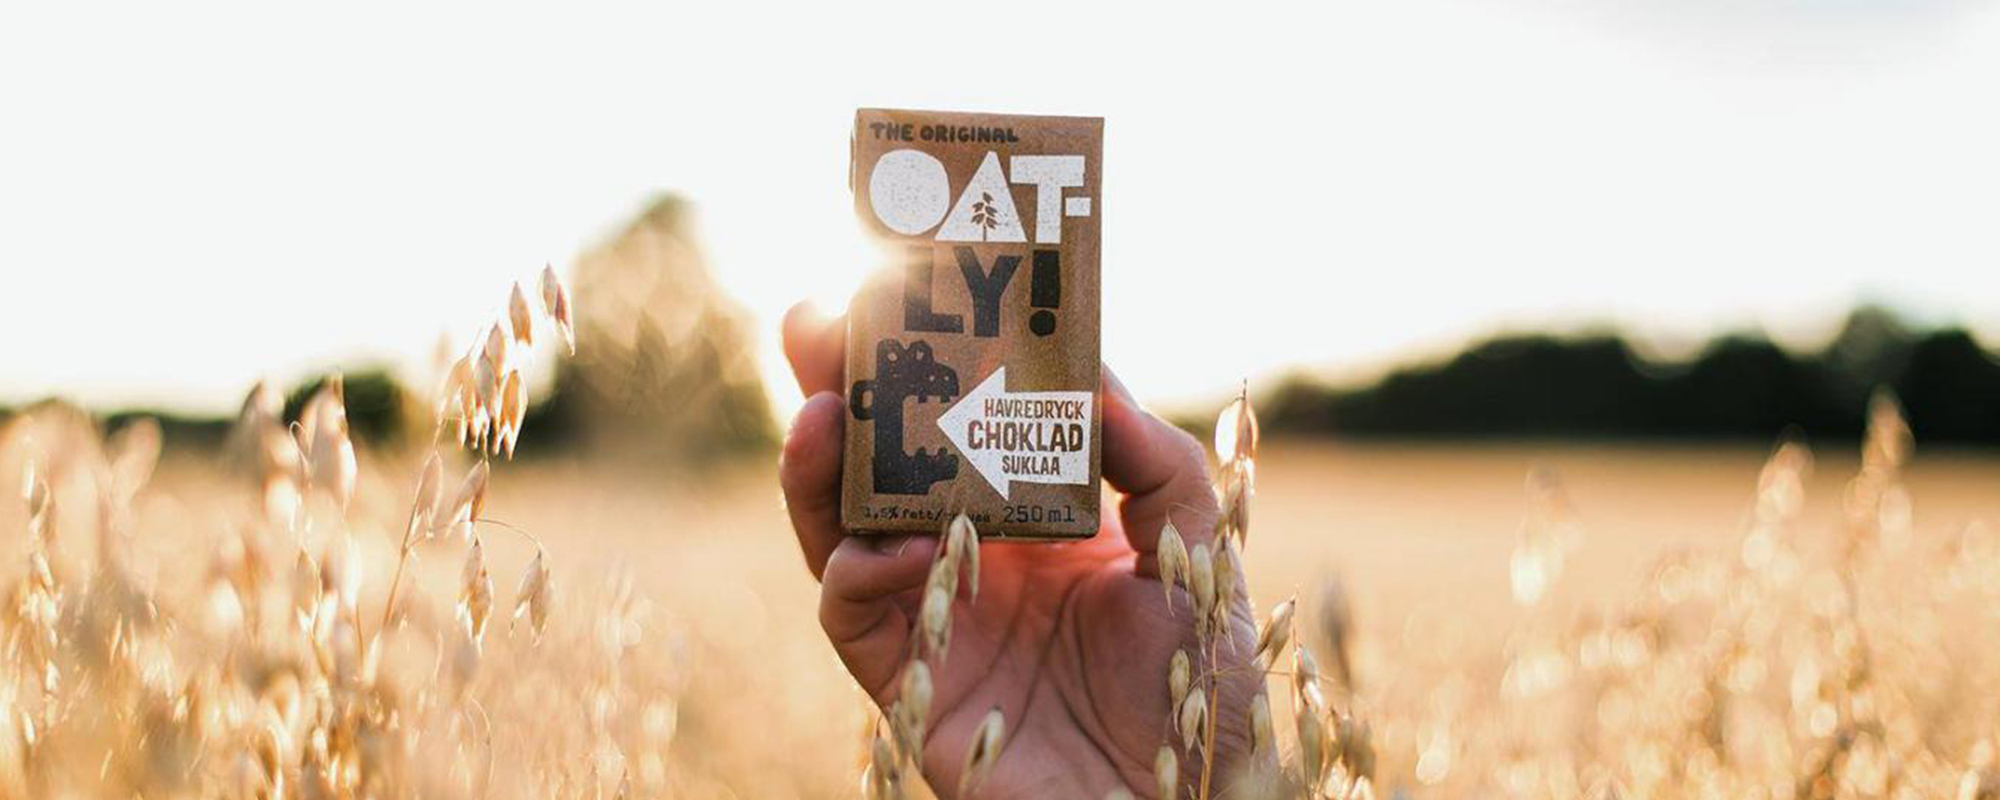 Featured image for “Oatly Selects Utah for Future Expansion”